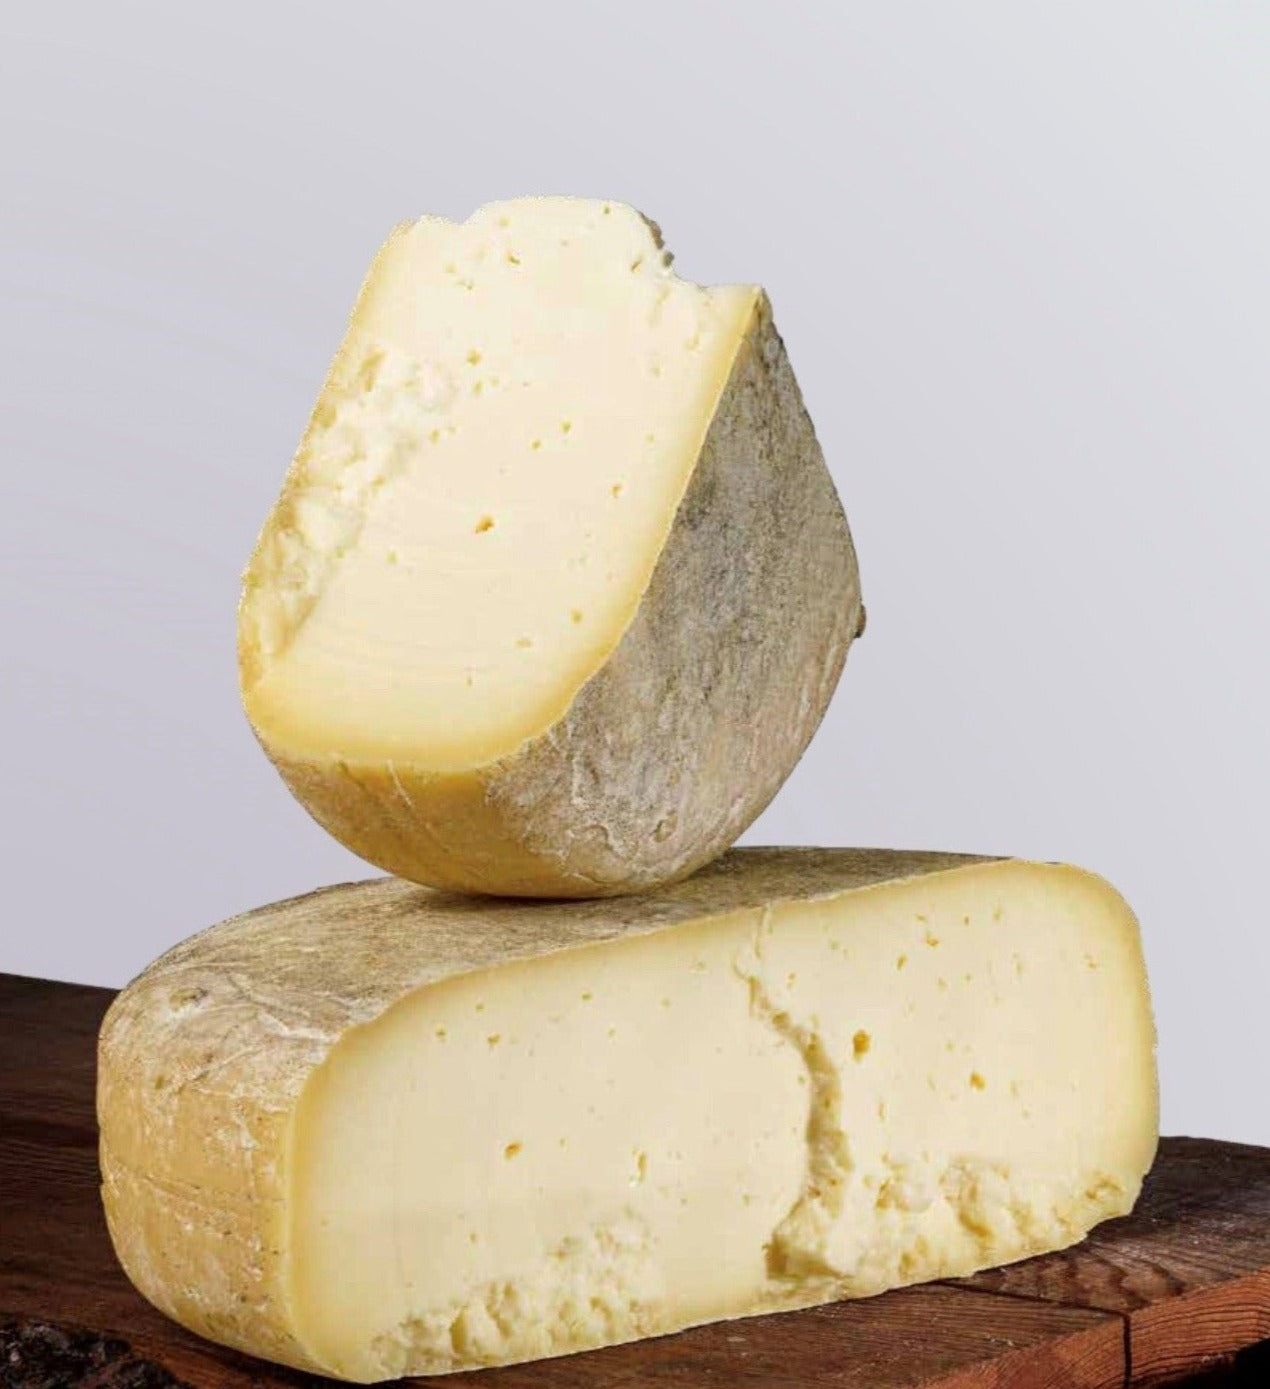 The cheese has a supple, elastic texture that ranges in colour from creamy to straw yellow, with small holes distributed unevenly through the paste. An incredibly aromatic cheese, Bra Tenero has a flavourful tang that stings the tongue with its pleasant intensity. It is sweet, buttery and nutty with a similarity to mild cheddar.